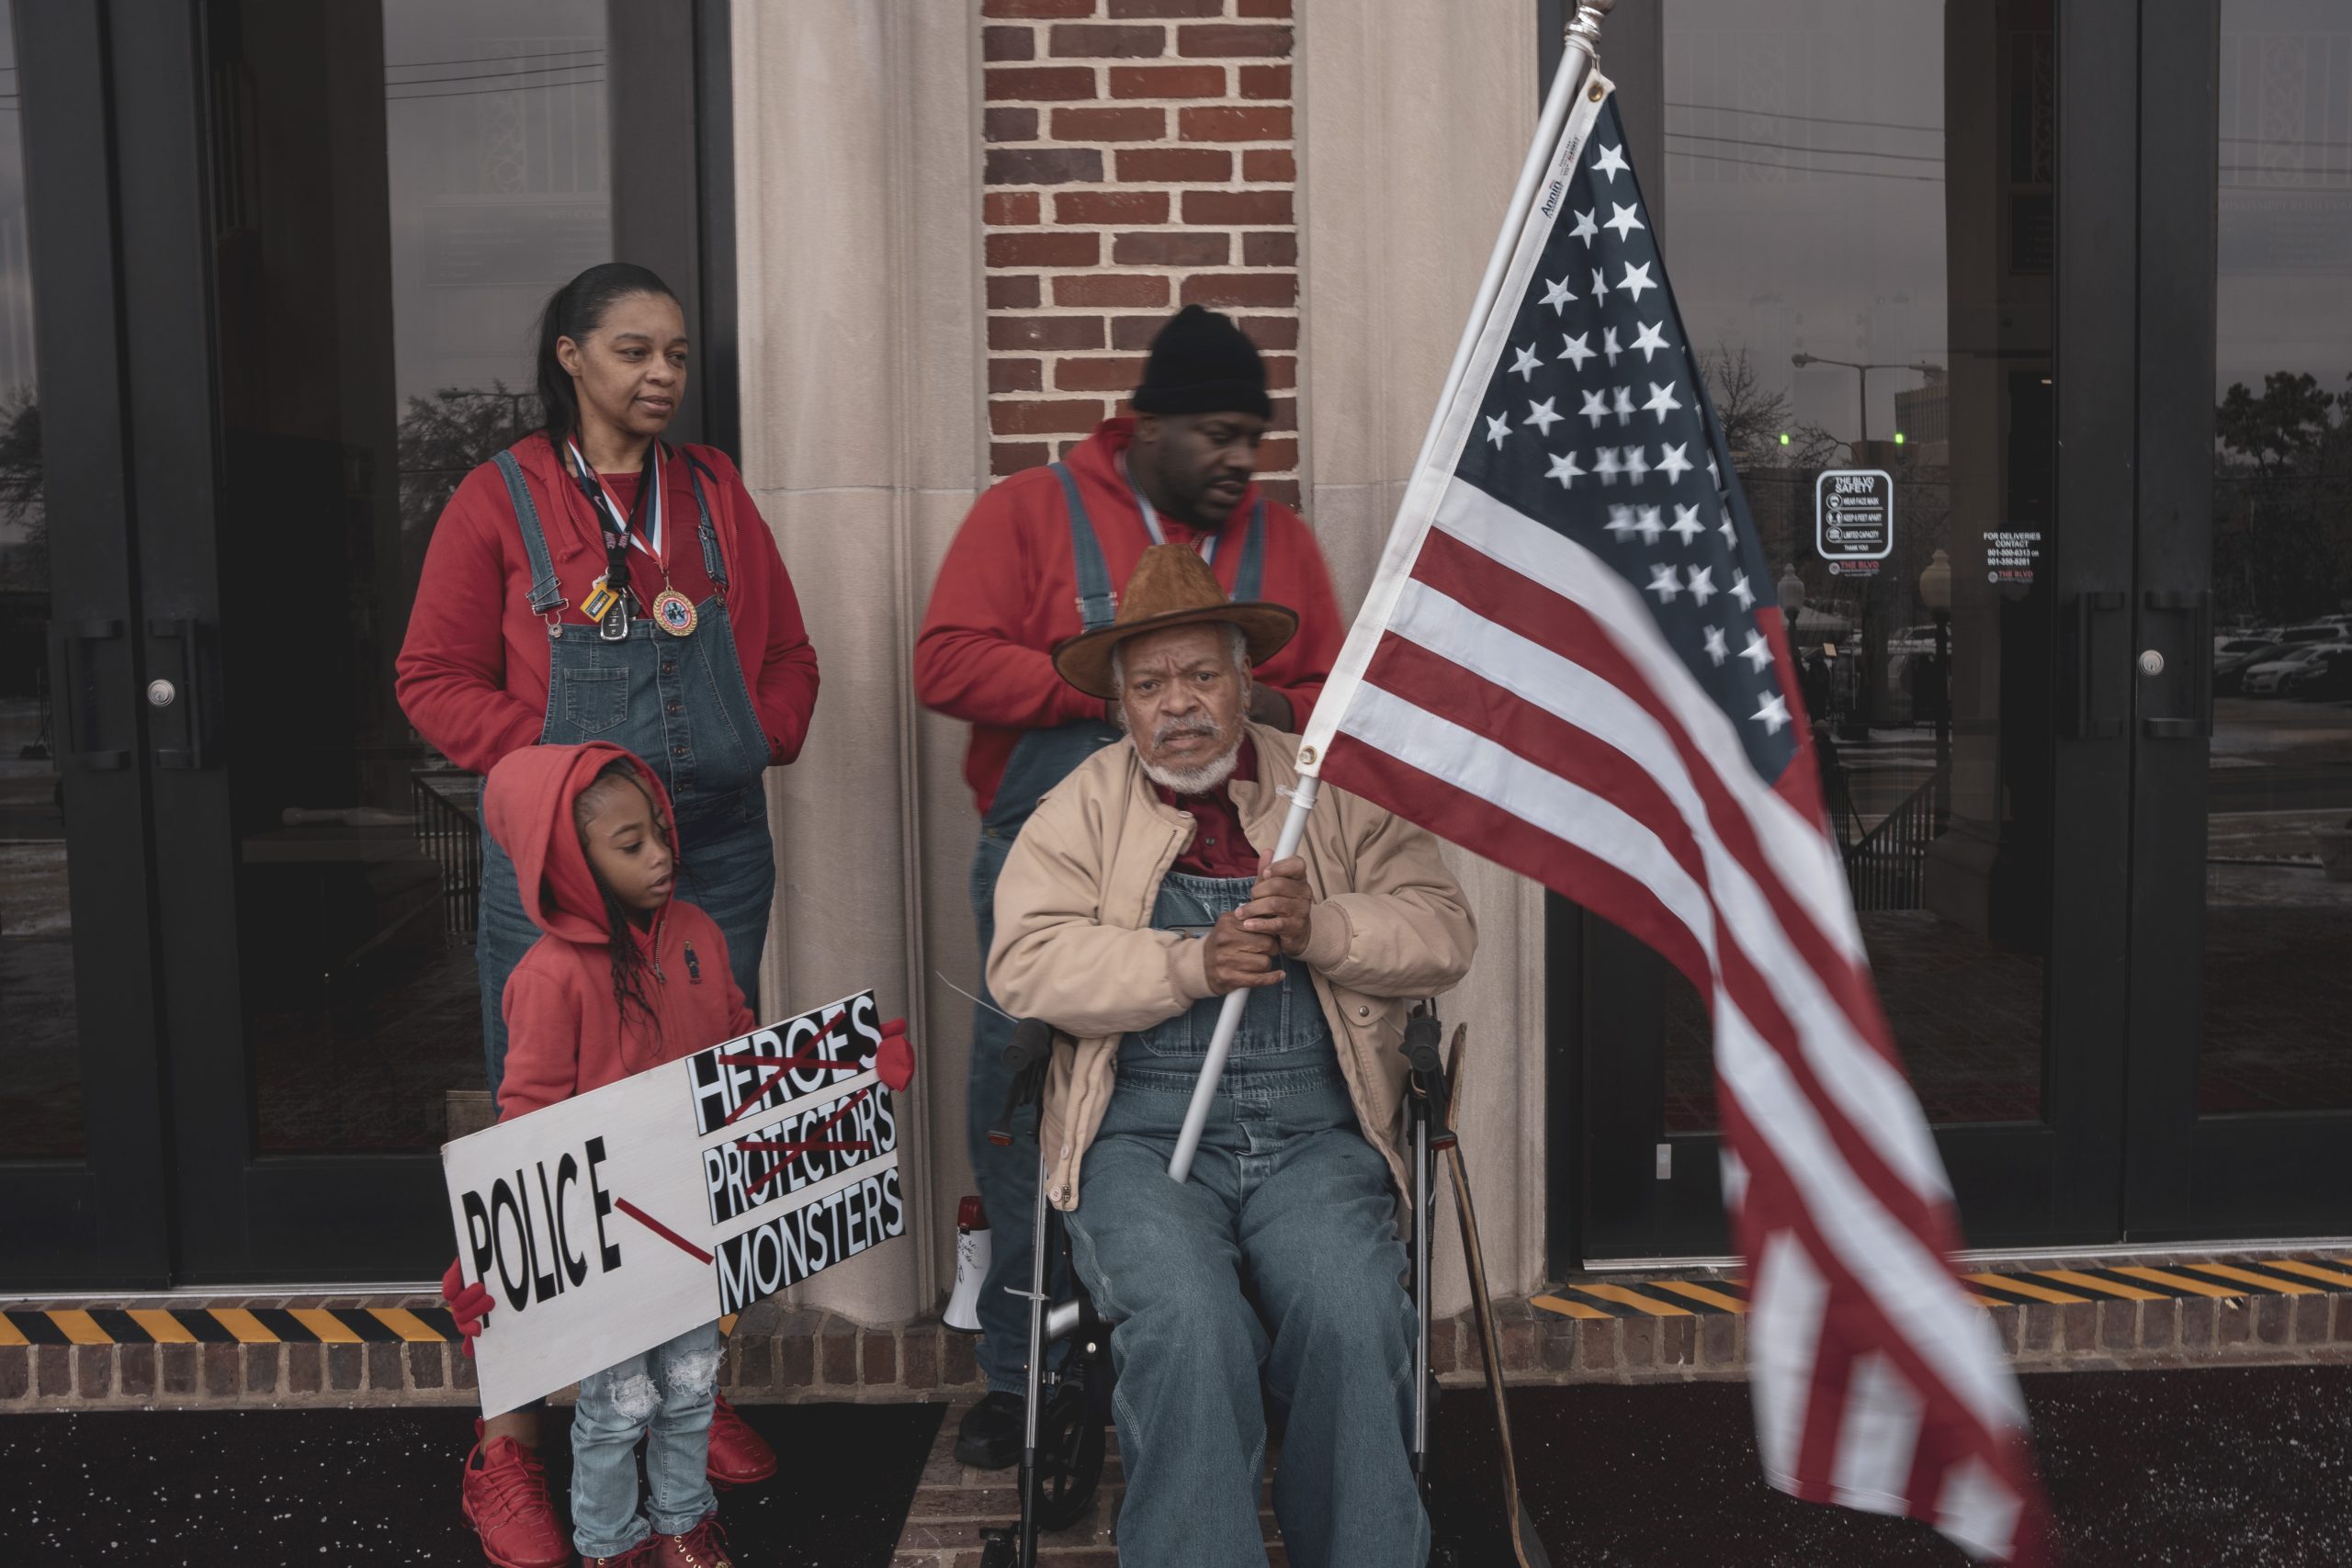 Four Black people wait outside a building. One is seated holding a large American flag.